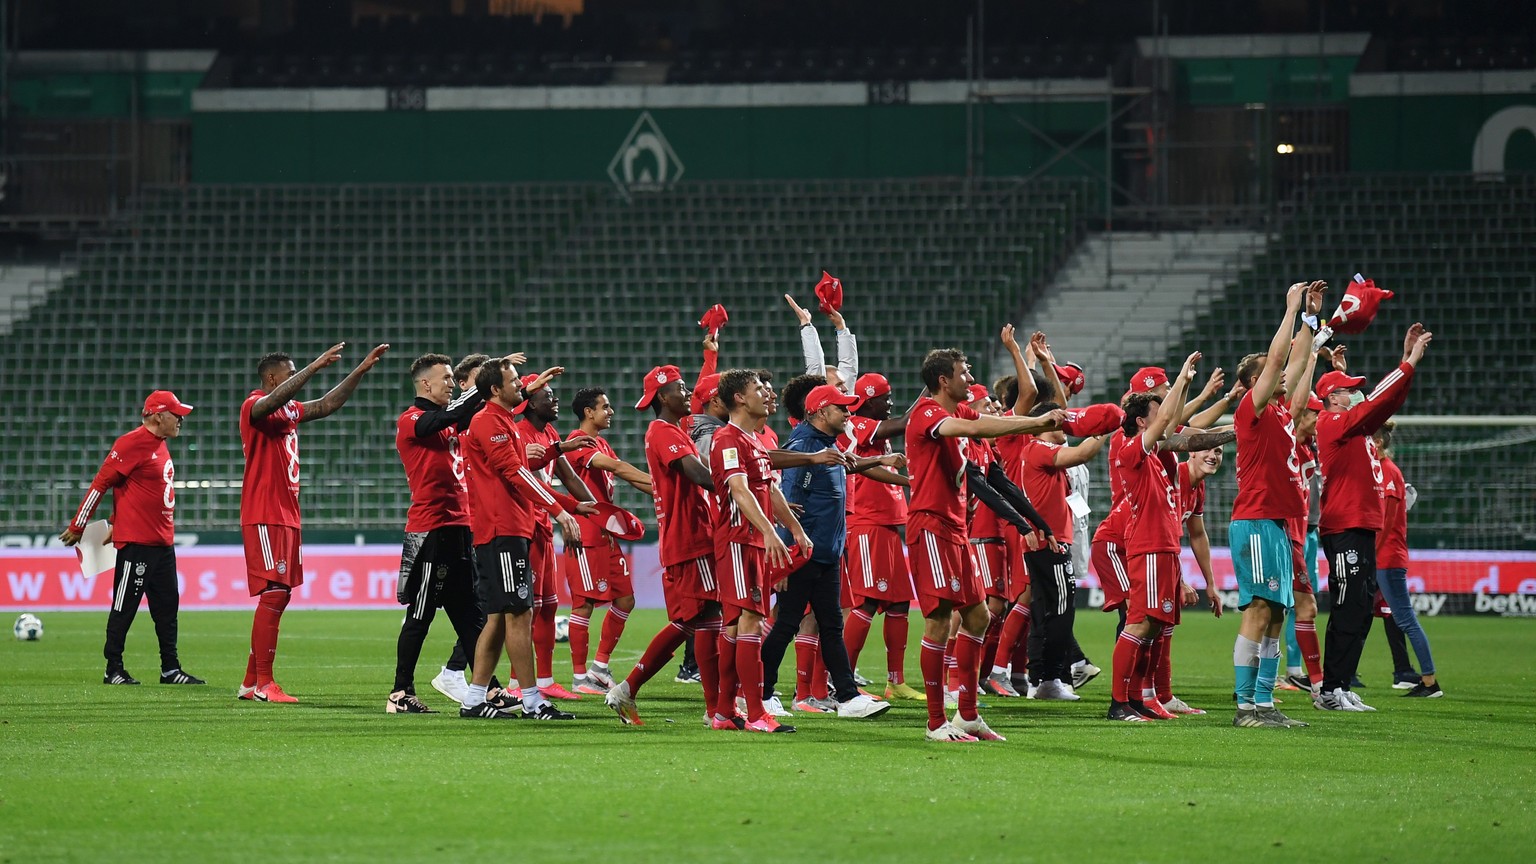 epa08489397 Players of Bayern Munich celebrate securing the Bundesliga title in front of empty stands following the victory in the German Bundesliga soccer match between SV Werder Bremen and FC Bayern ...